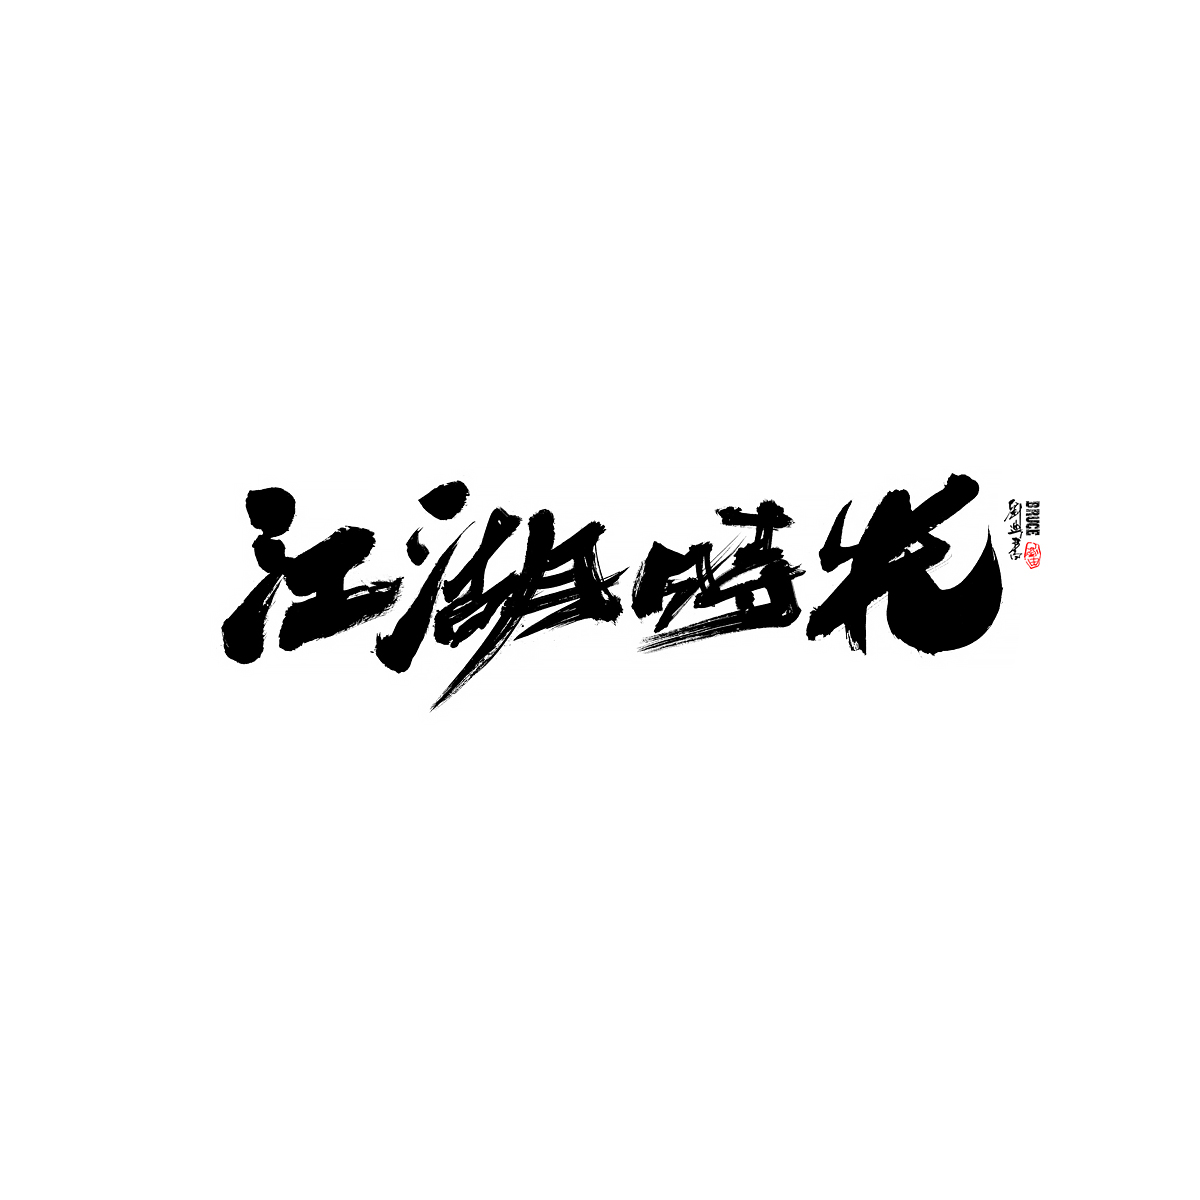 22P Collection of the latest Chinese font design schemes in 2021 #.626